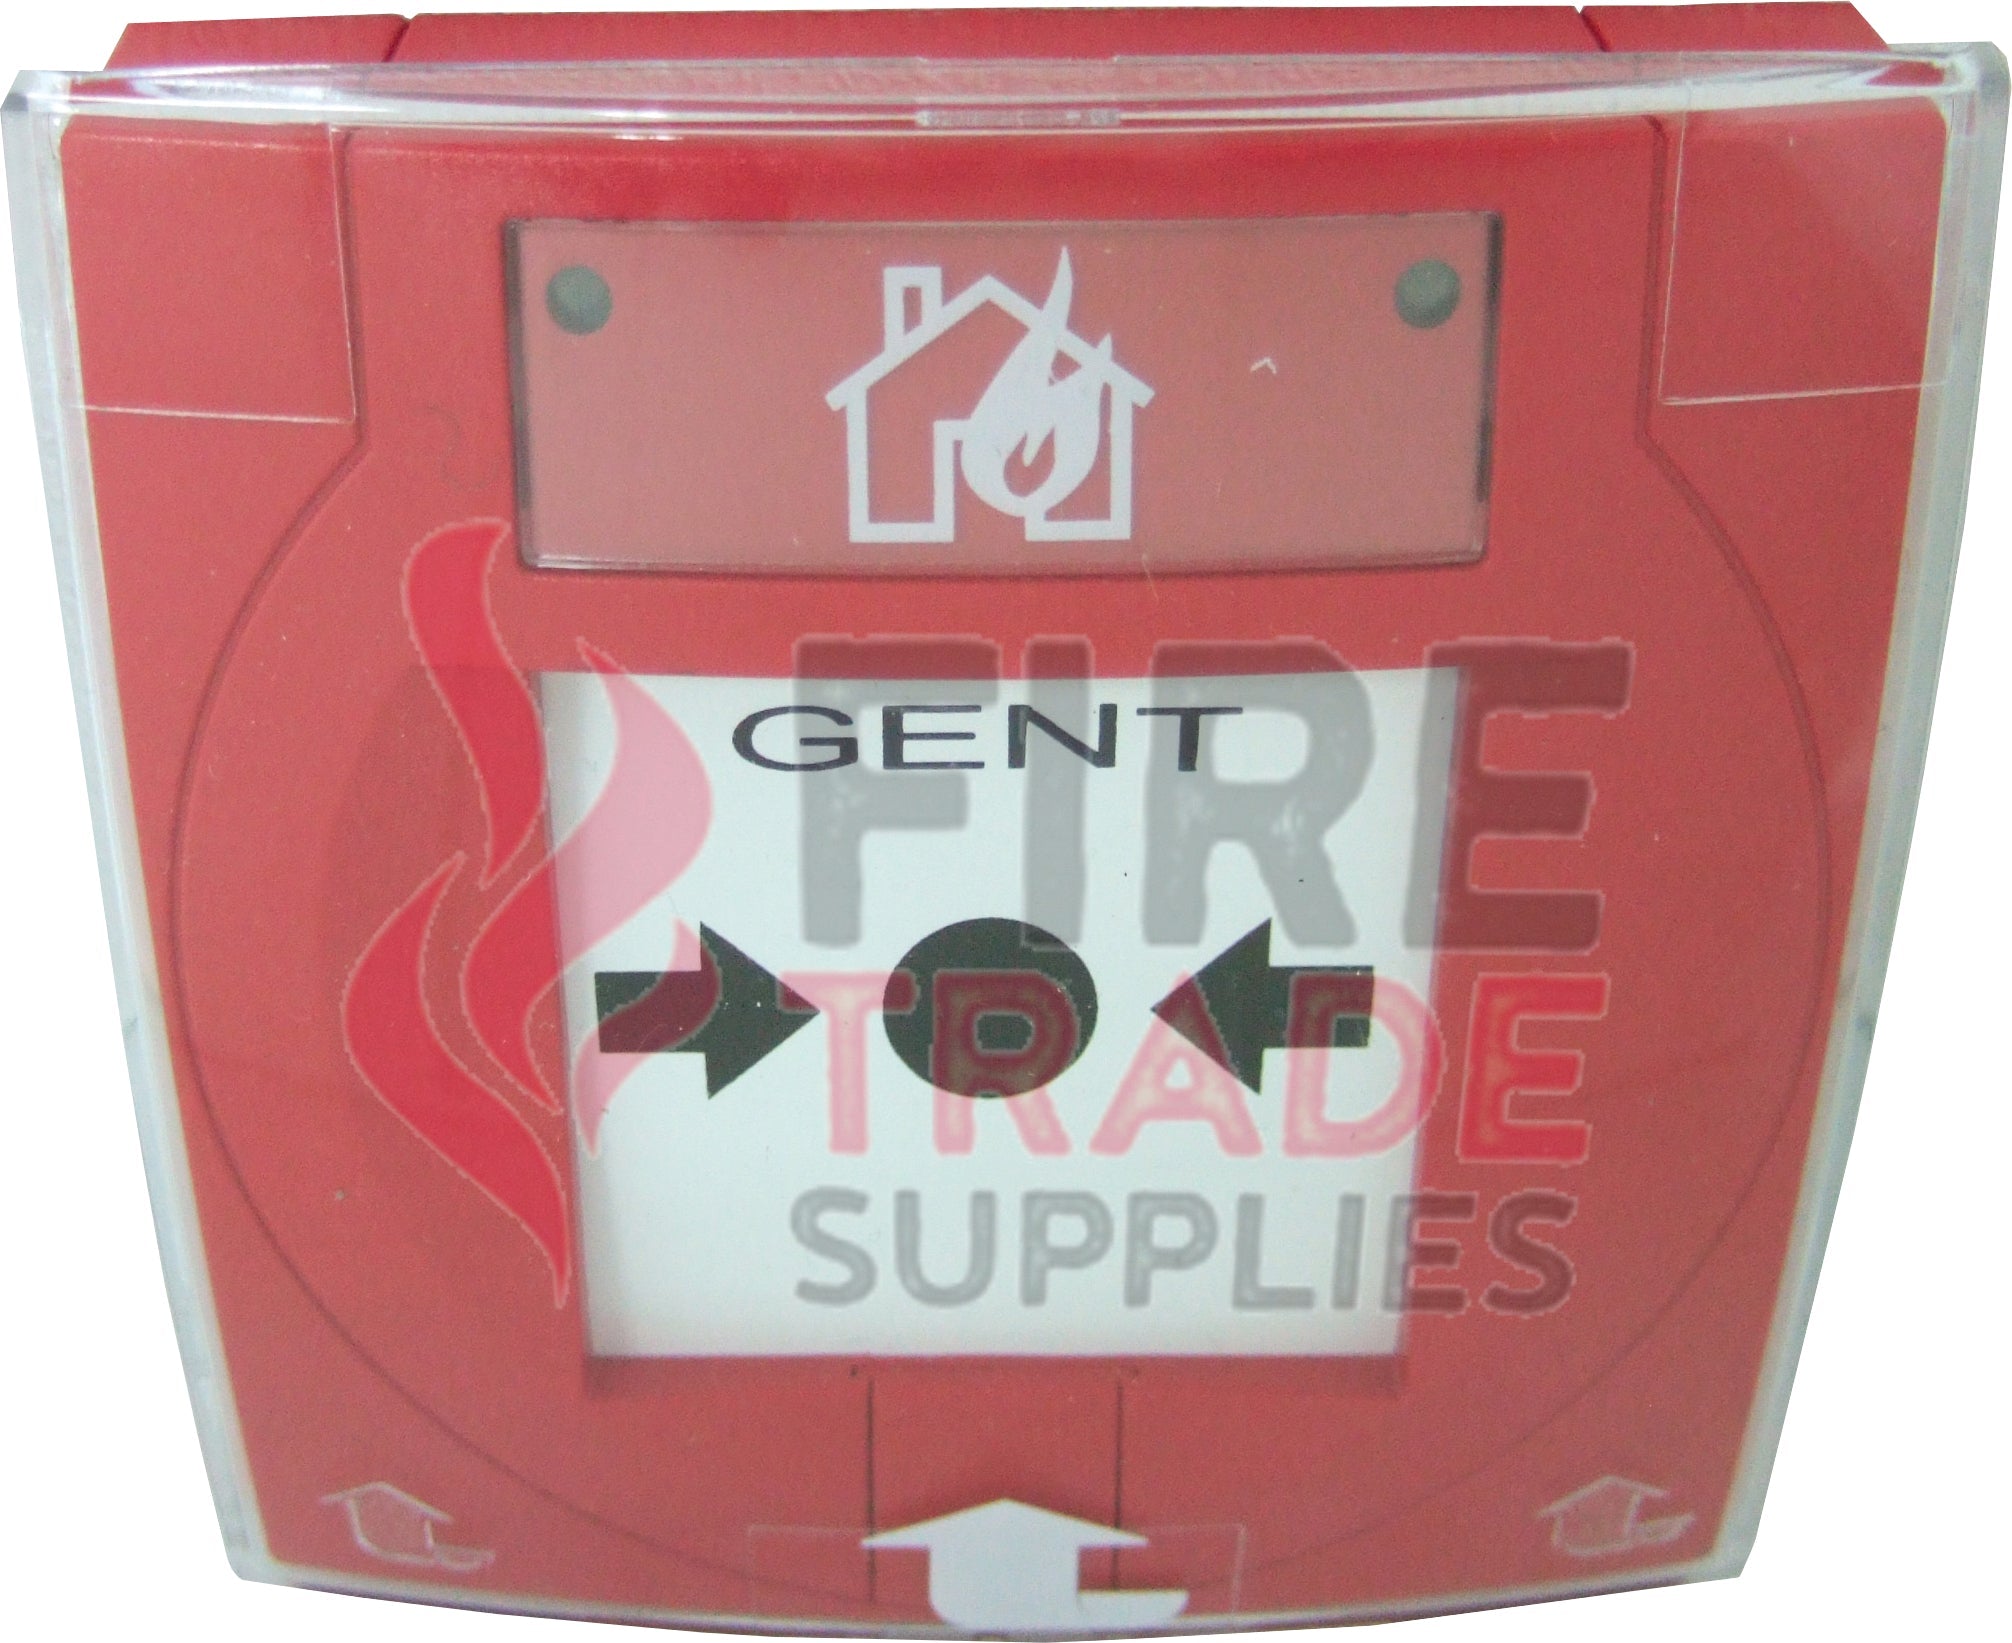 S4-34845 Vigilon Manual Call Point with Resettable Element & Protective Cover (Ex Back Box) - Fire Trade Supplies